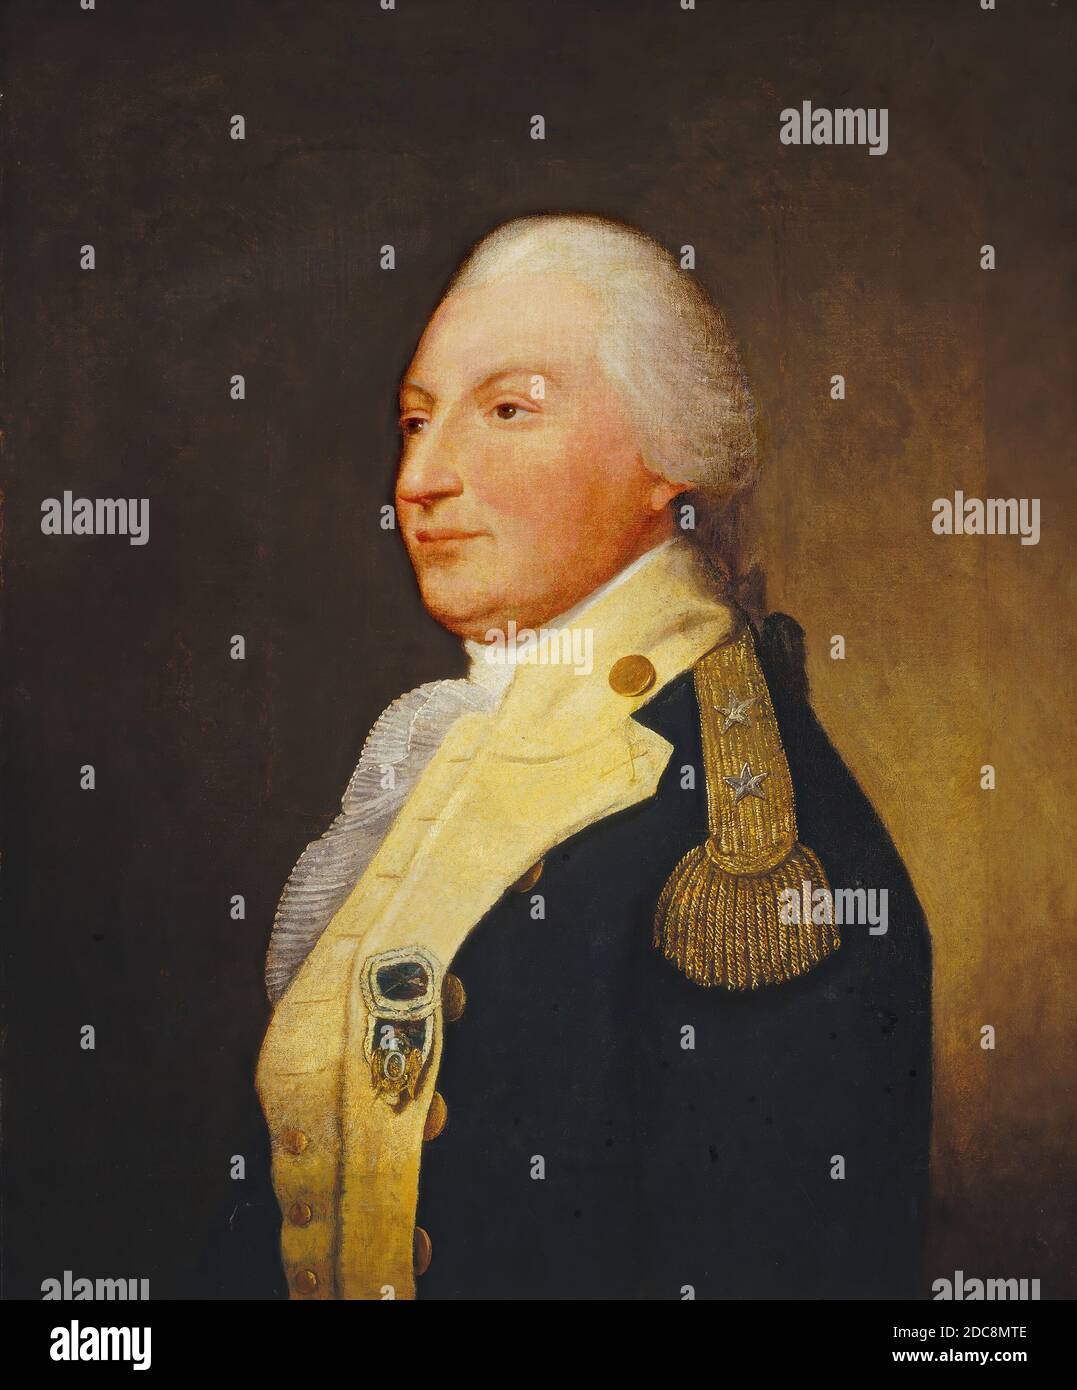 Robert Edge Pine, (painter), American, 1730 - 1788, General William Smallwood, 1785/1788, oil on canvas, overall: 73.8 x 61.1 cm (29 1/16 x 24 1/16 in.), framed: 93 x 80.7 x 10.2 cm (36 5/8 x 31 3/4 x 4 in Stock Photo